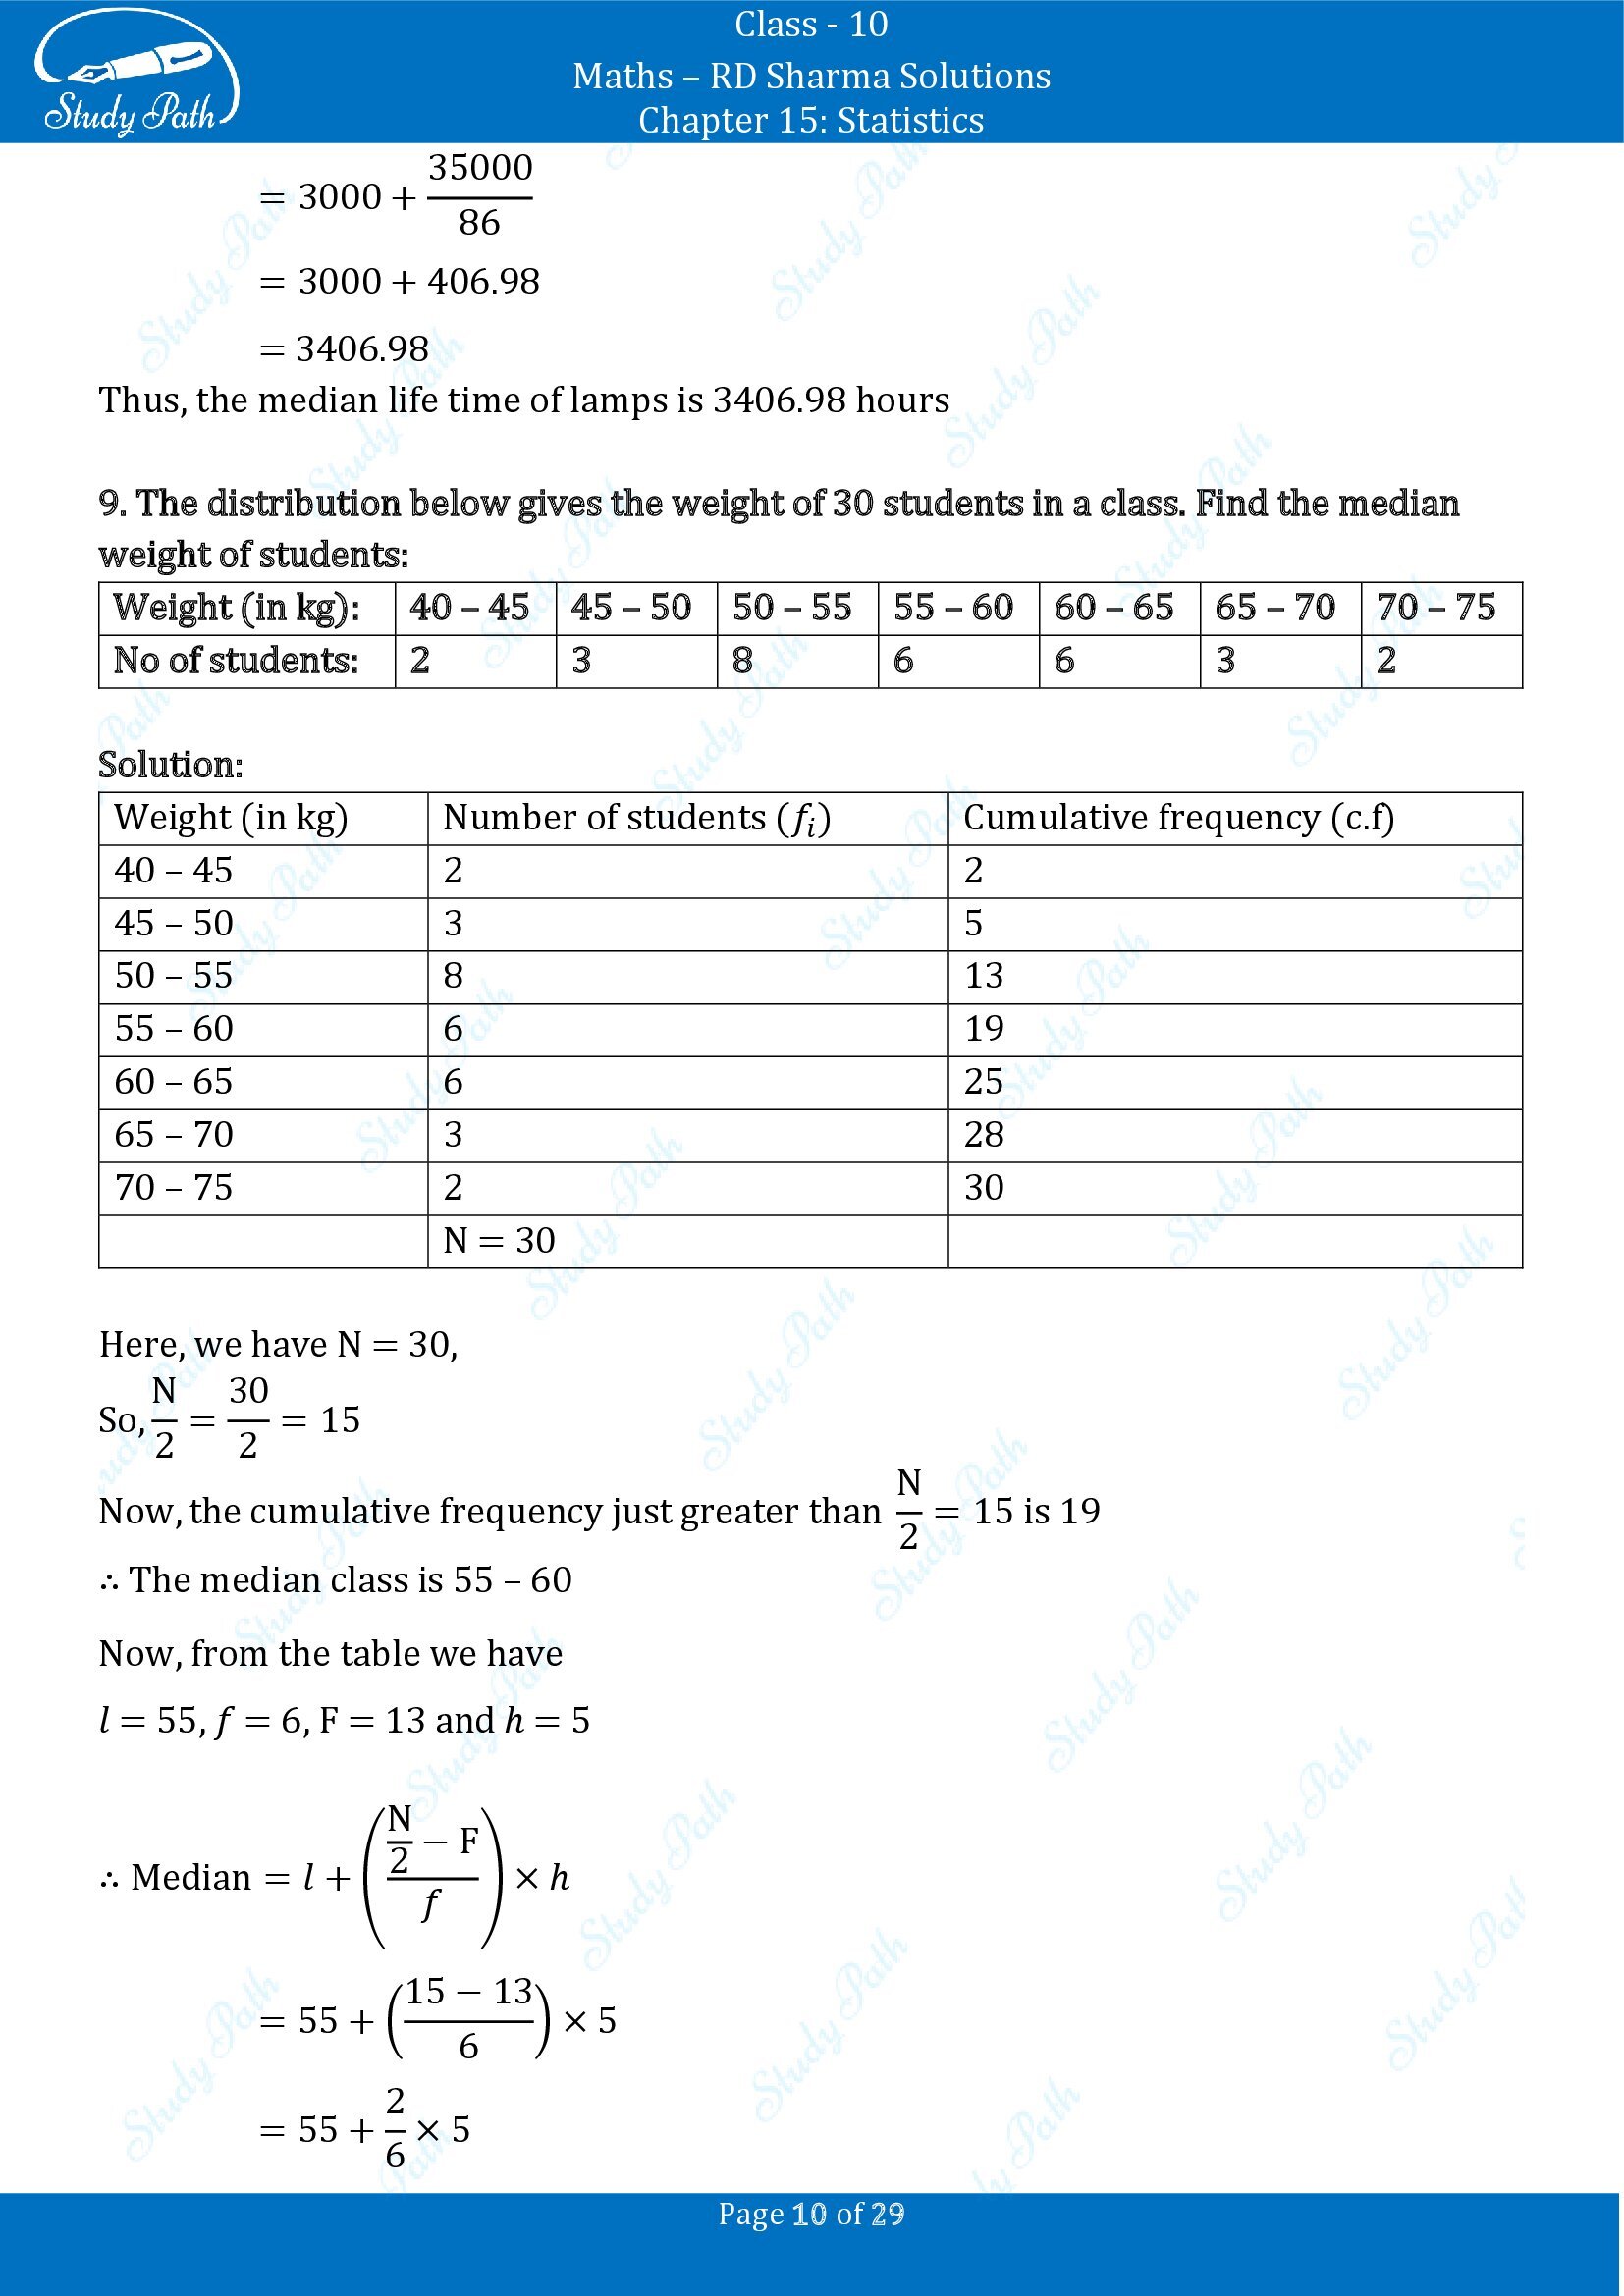 RD Sharma Solutions Class 10 Chapter 15 Statistics Exercise 15.4 00010